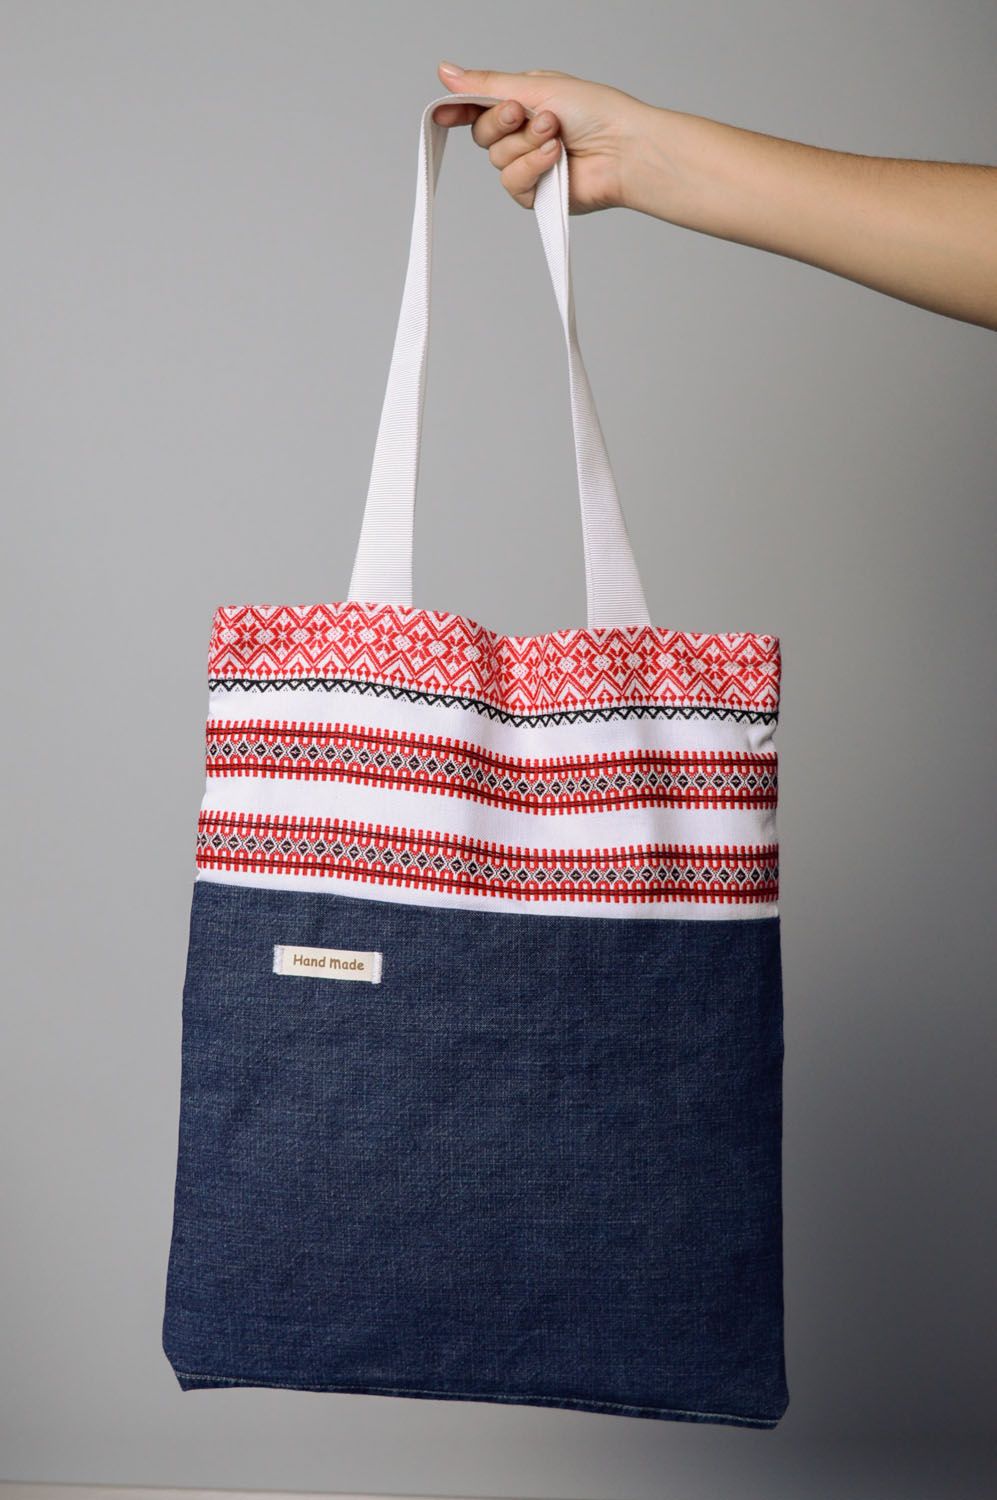 Fabric bag in ethnic style photo 3